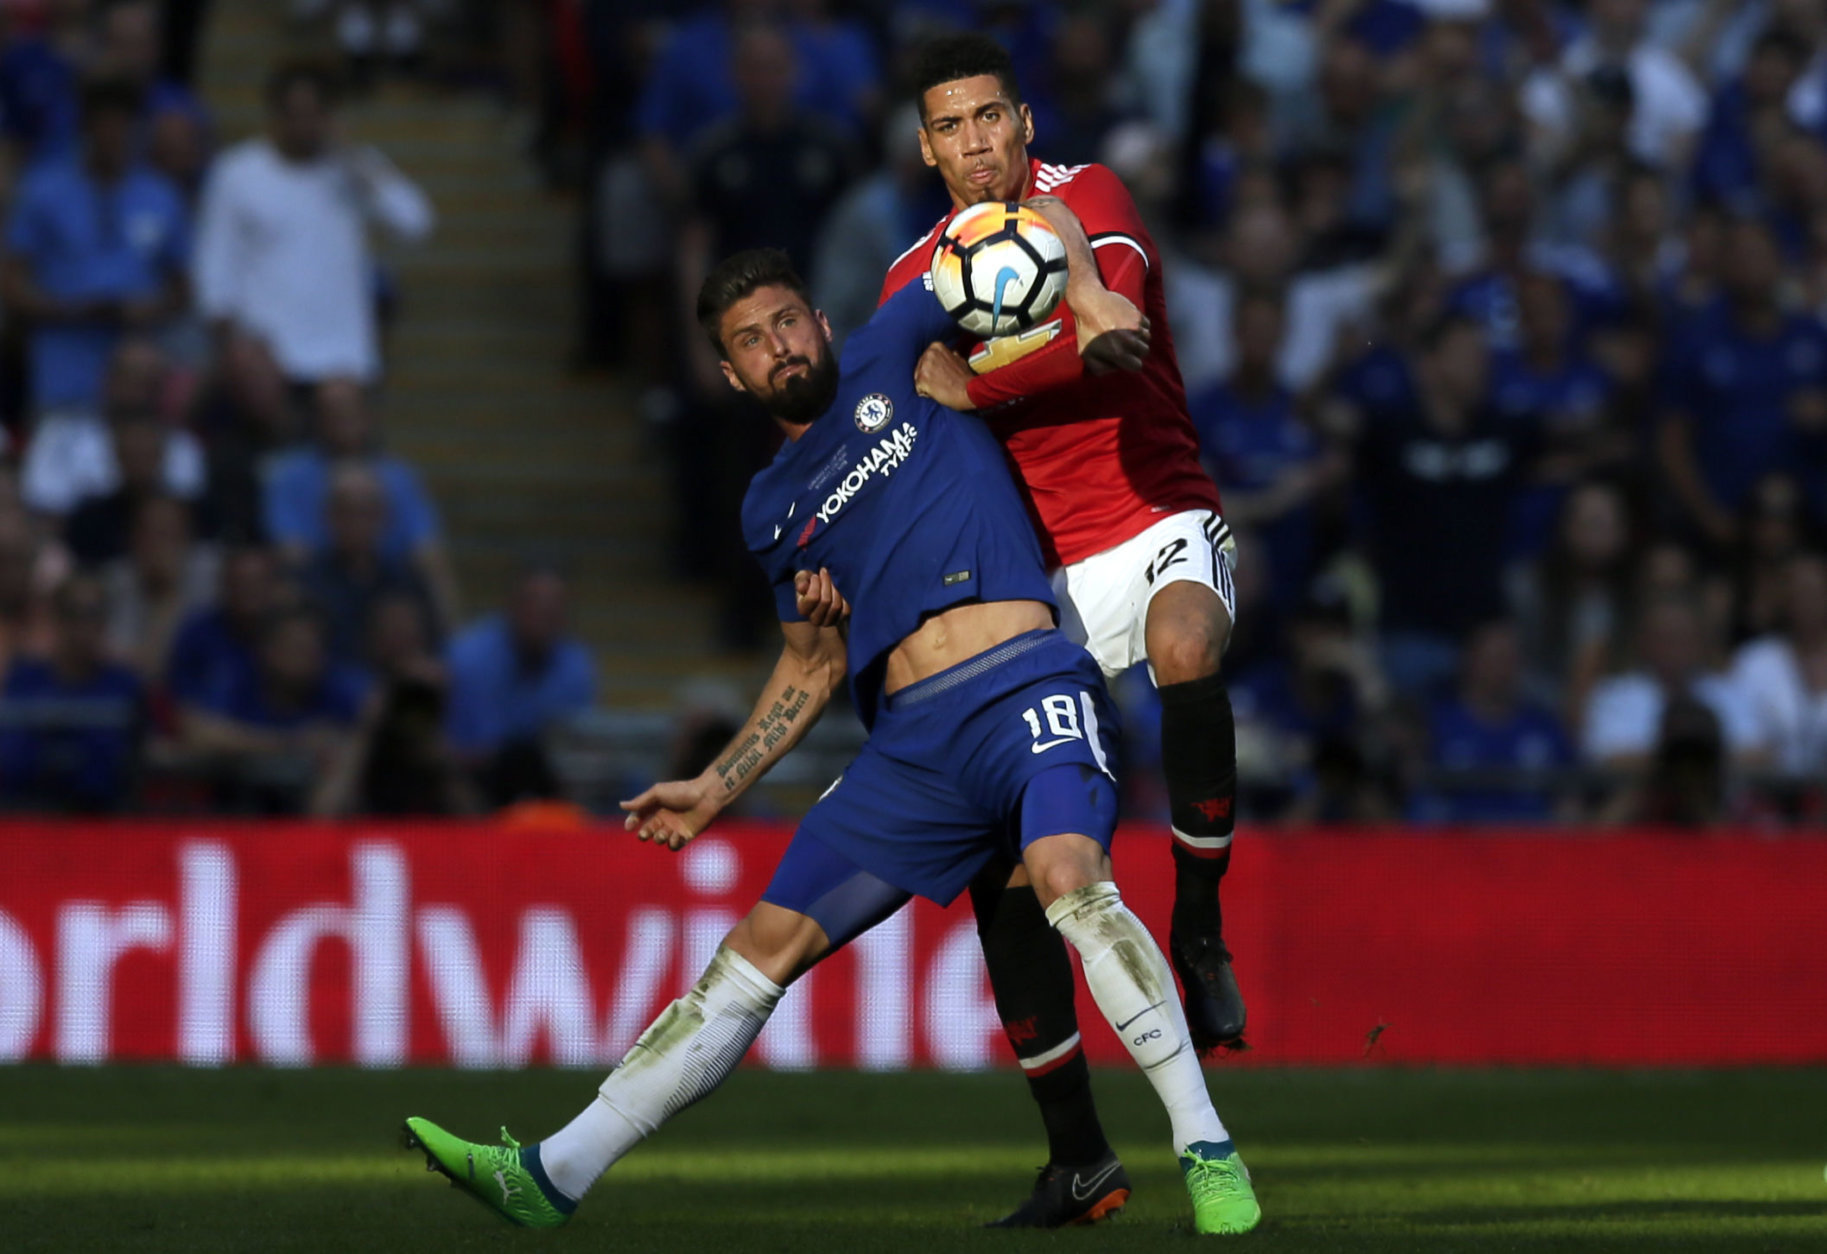 Chelsea's Olivier Giroud fights for the ball with Manchester United's Chris Smalling, right, during the English FA Cup final soccer match between Chelsea and Manchester United at Wembley stadium in London, Saturday, May 19, 2018. (AP Photo/Tim Ireland)